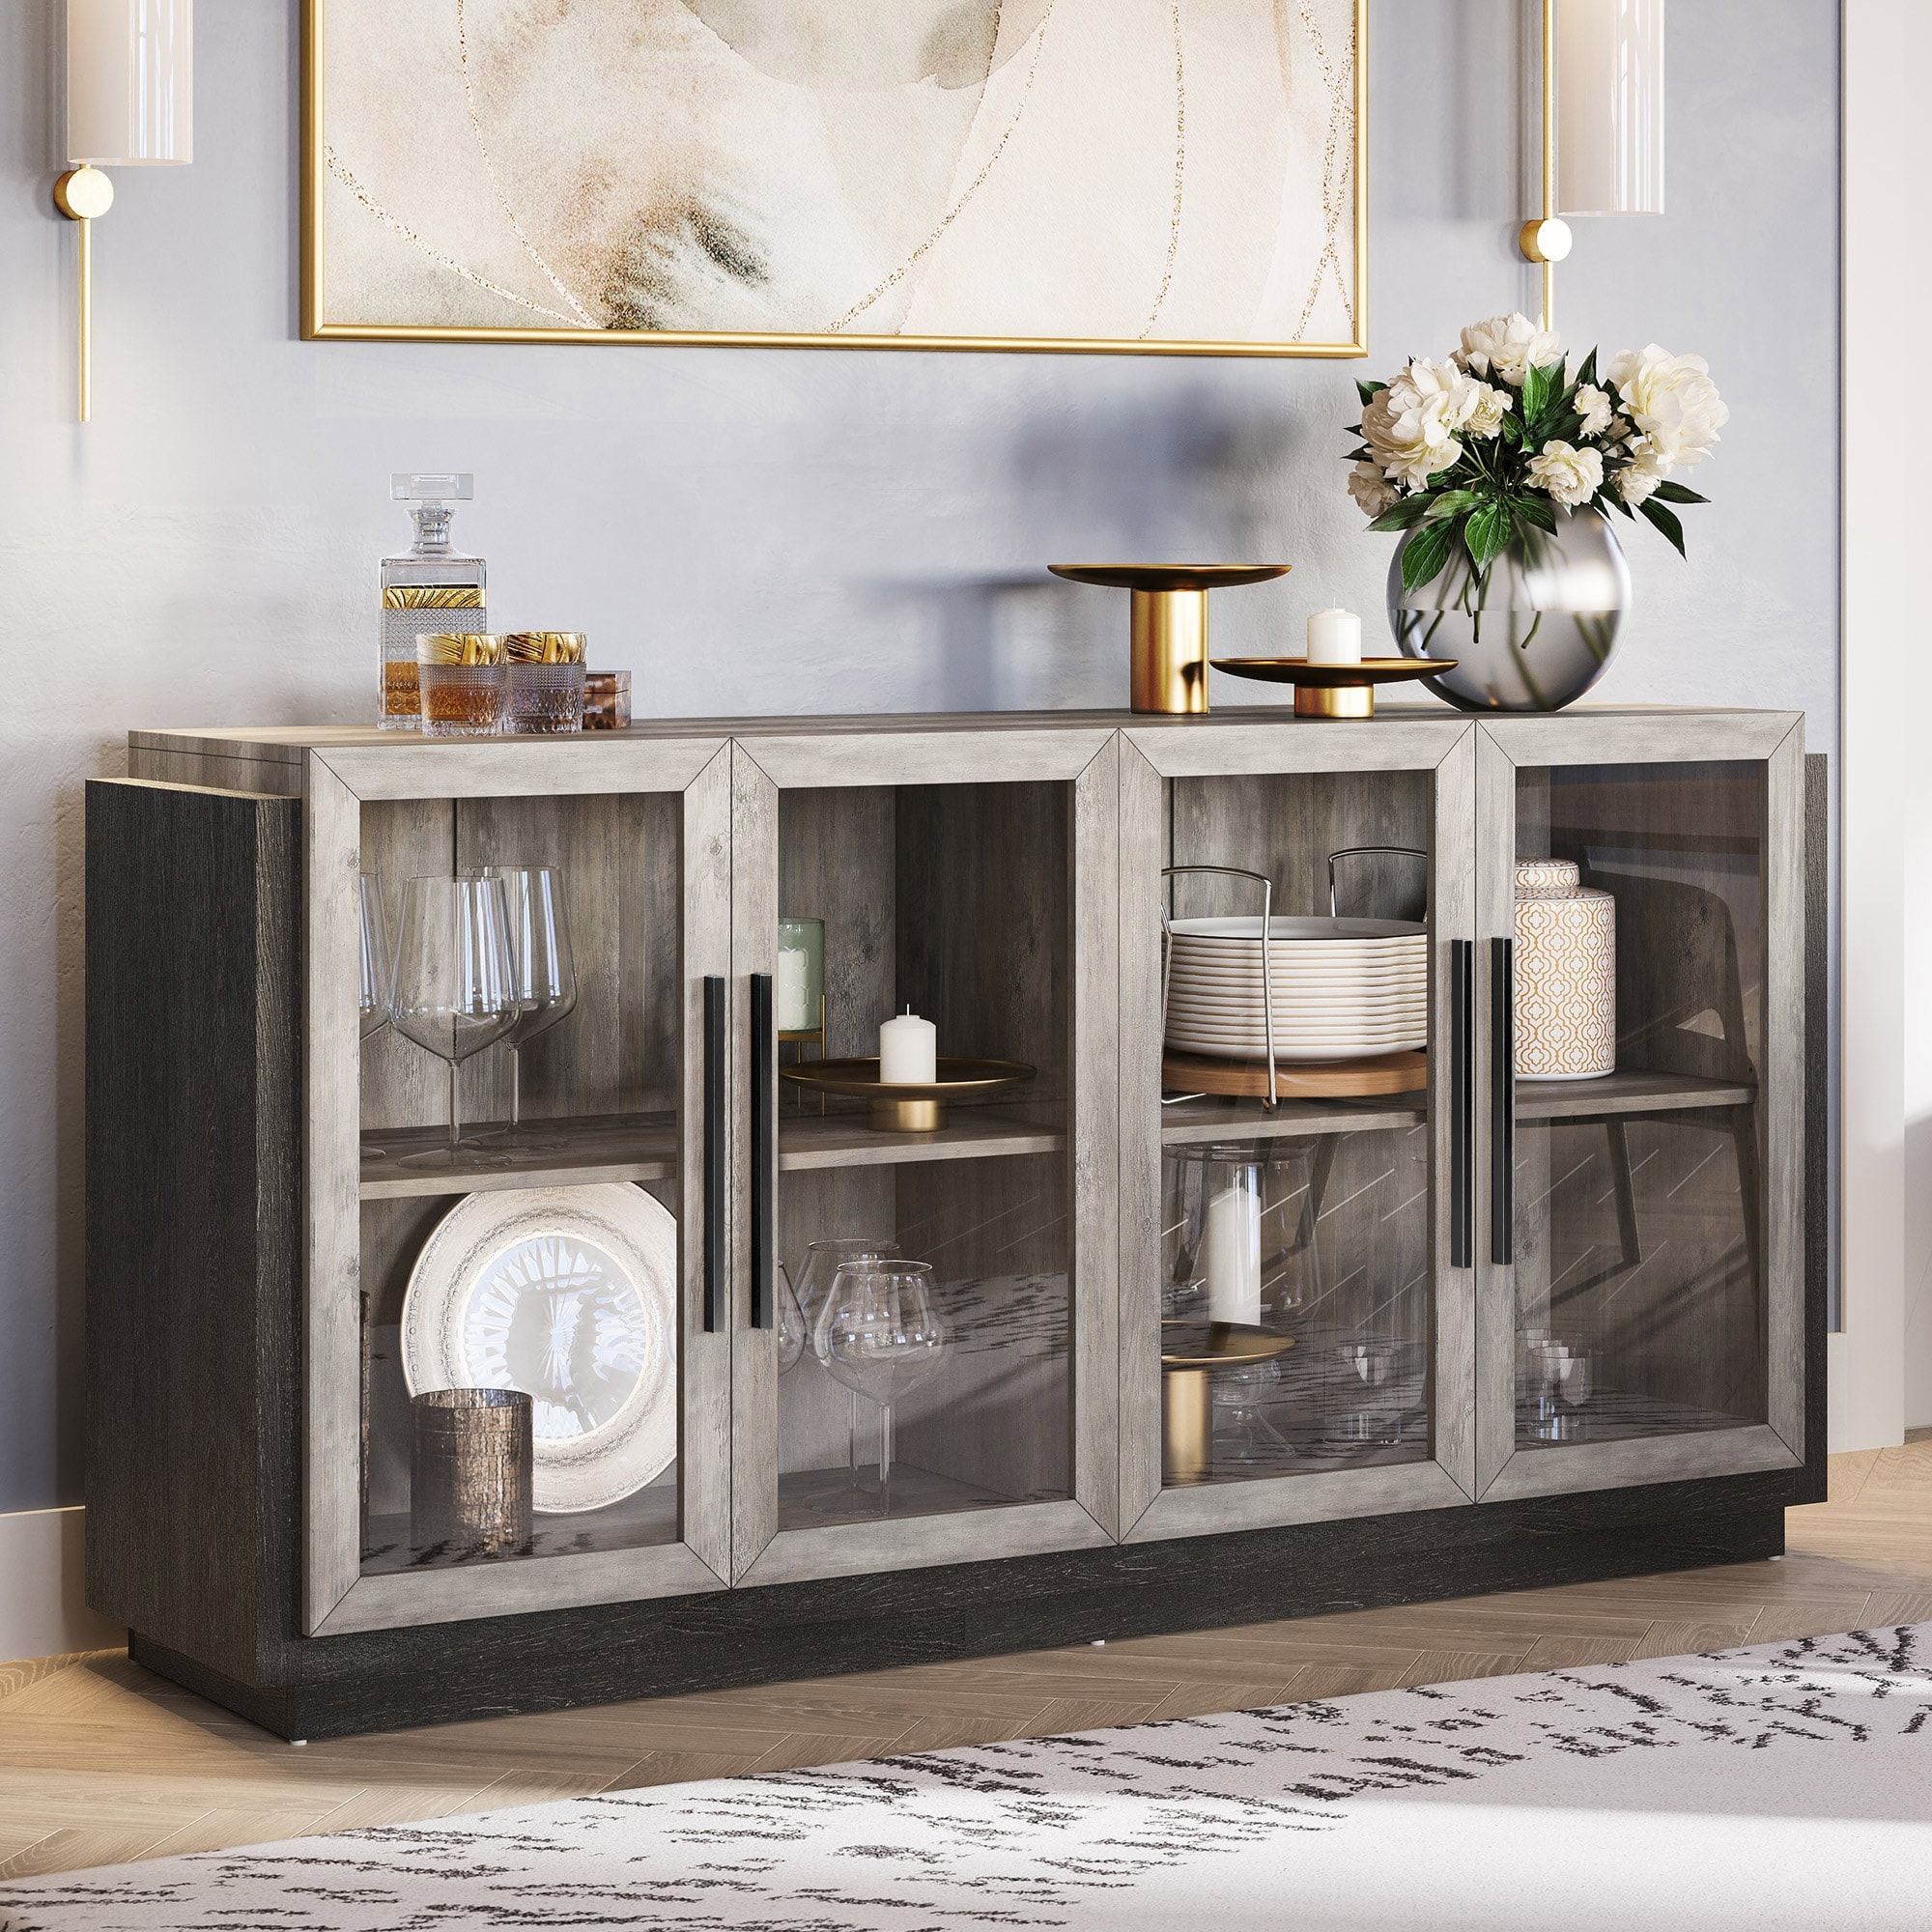 Well Known Belleze Brixston Sideboard Buffet Cabinet With Storage – On Sale – Bed Bath  & Beyond – 36540841 With Buffet Cabinet Sideboards (View 7 of 10)